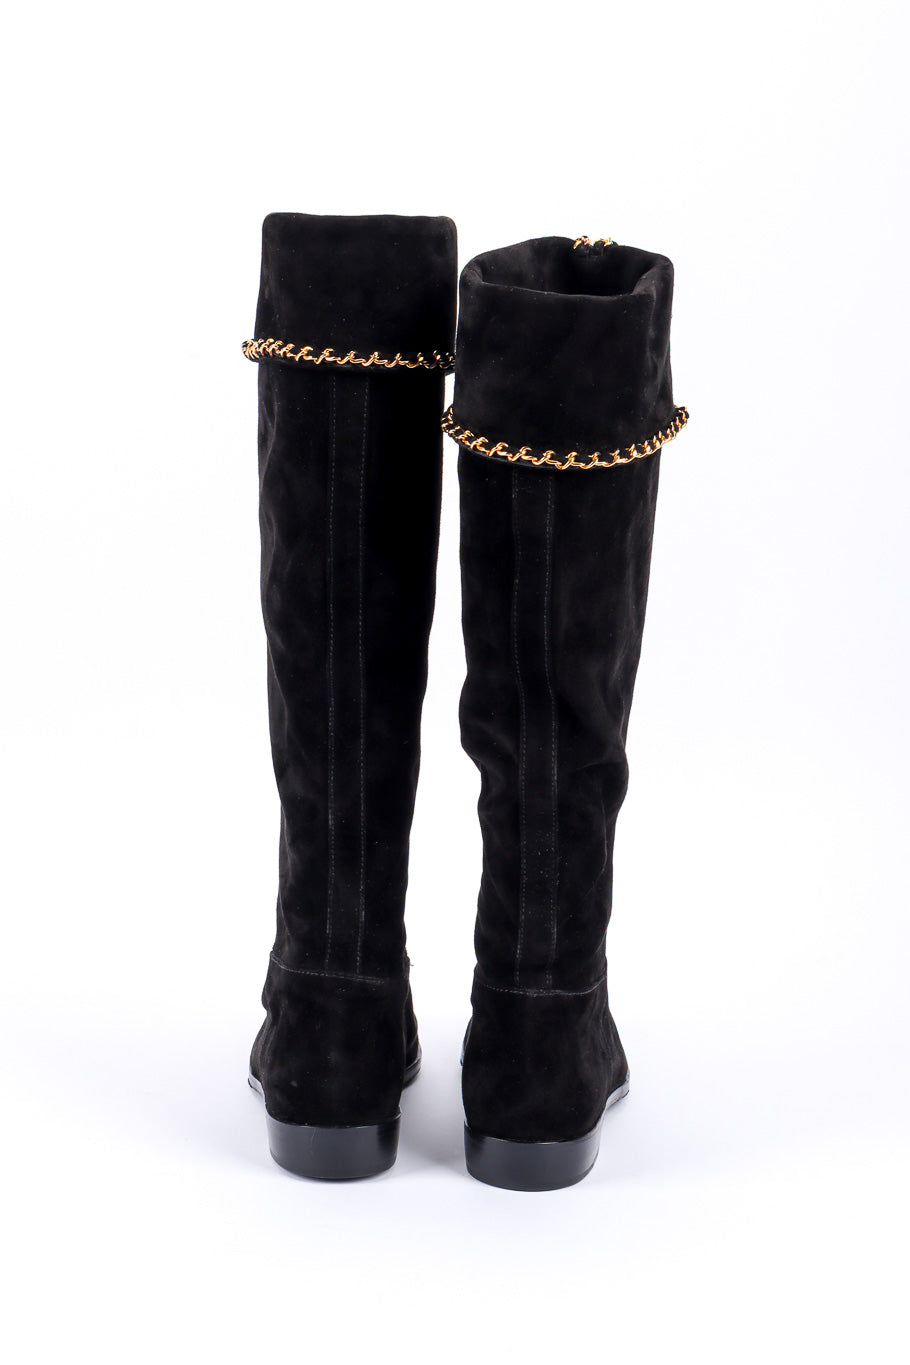 Vintage Chanel Chainlink and Suede Riding Boots back view @recessla